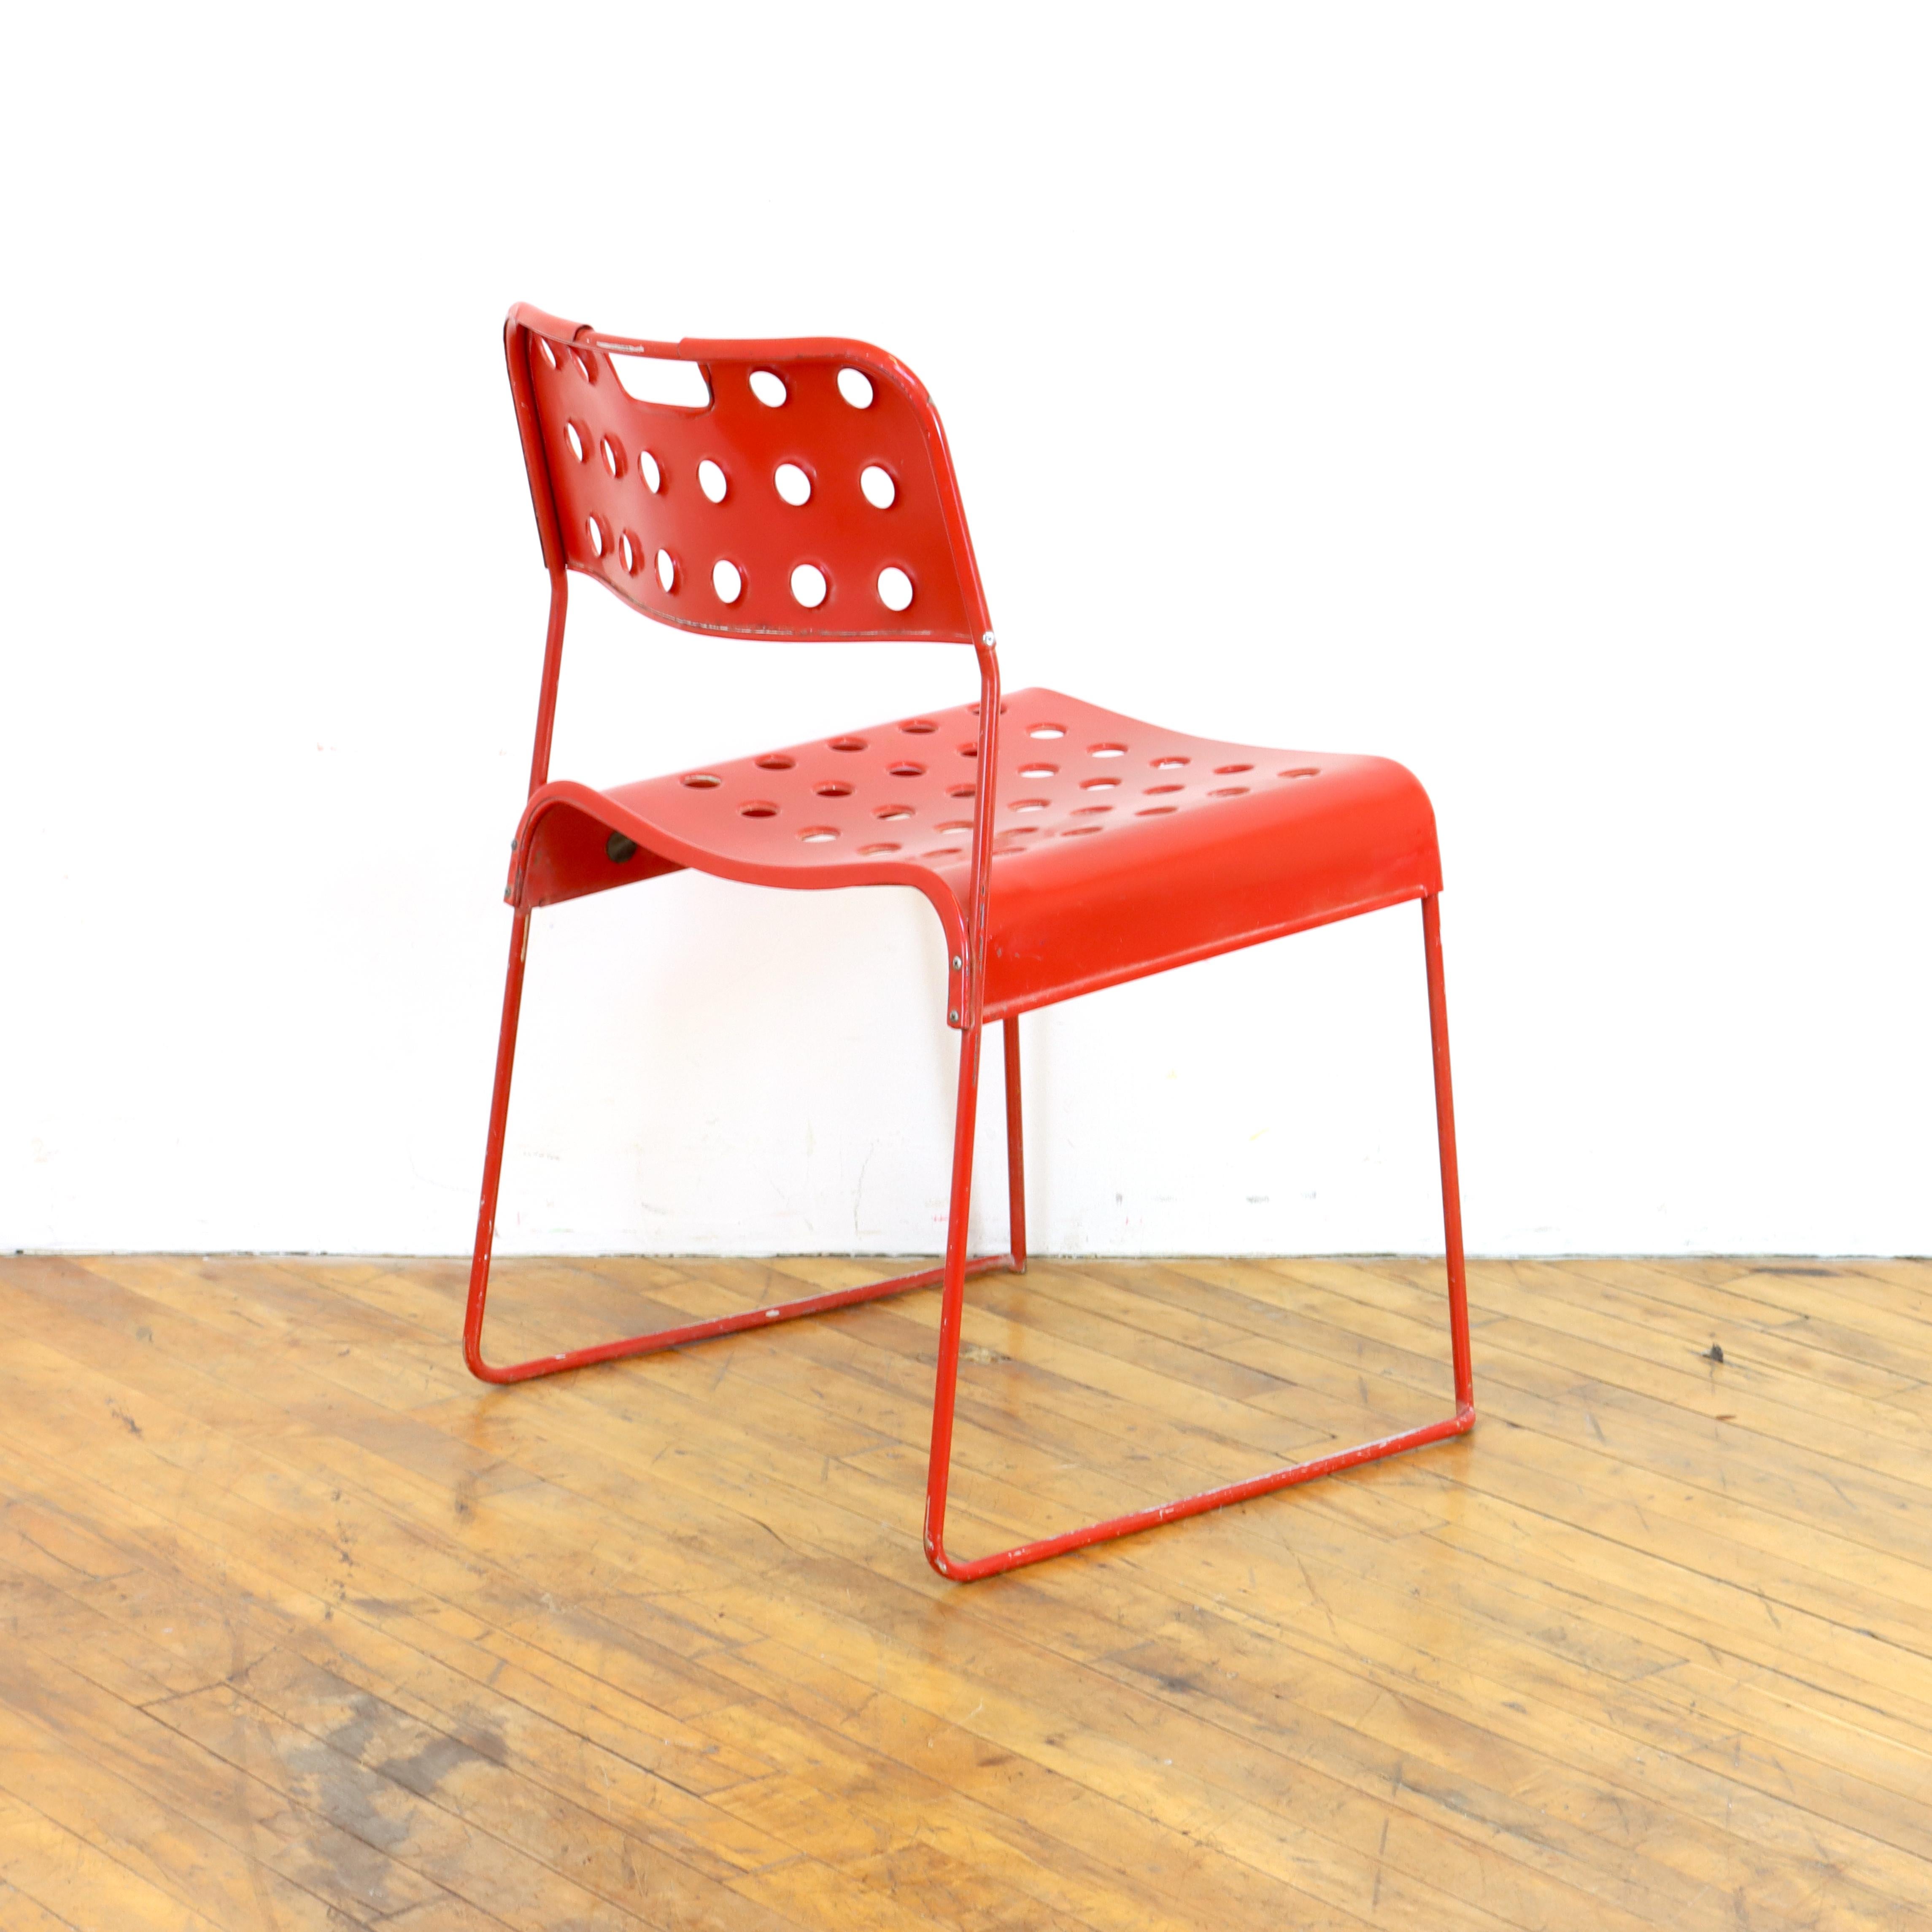 Pair of Vintage Red Omkstak Chairs  In Good Condition For Sale In Oakland, CA